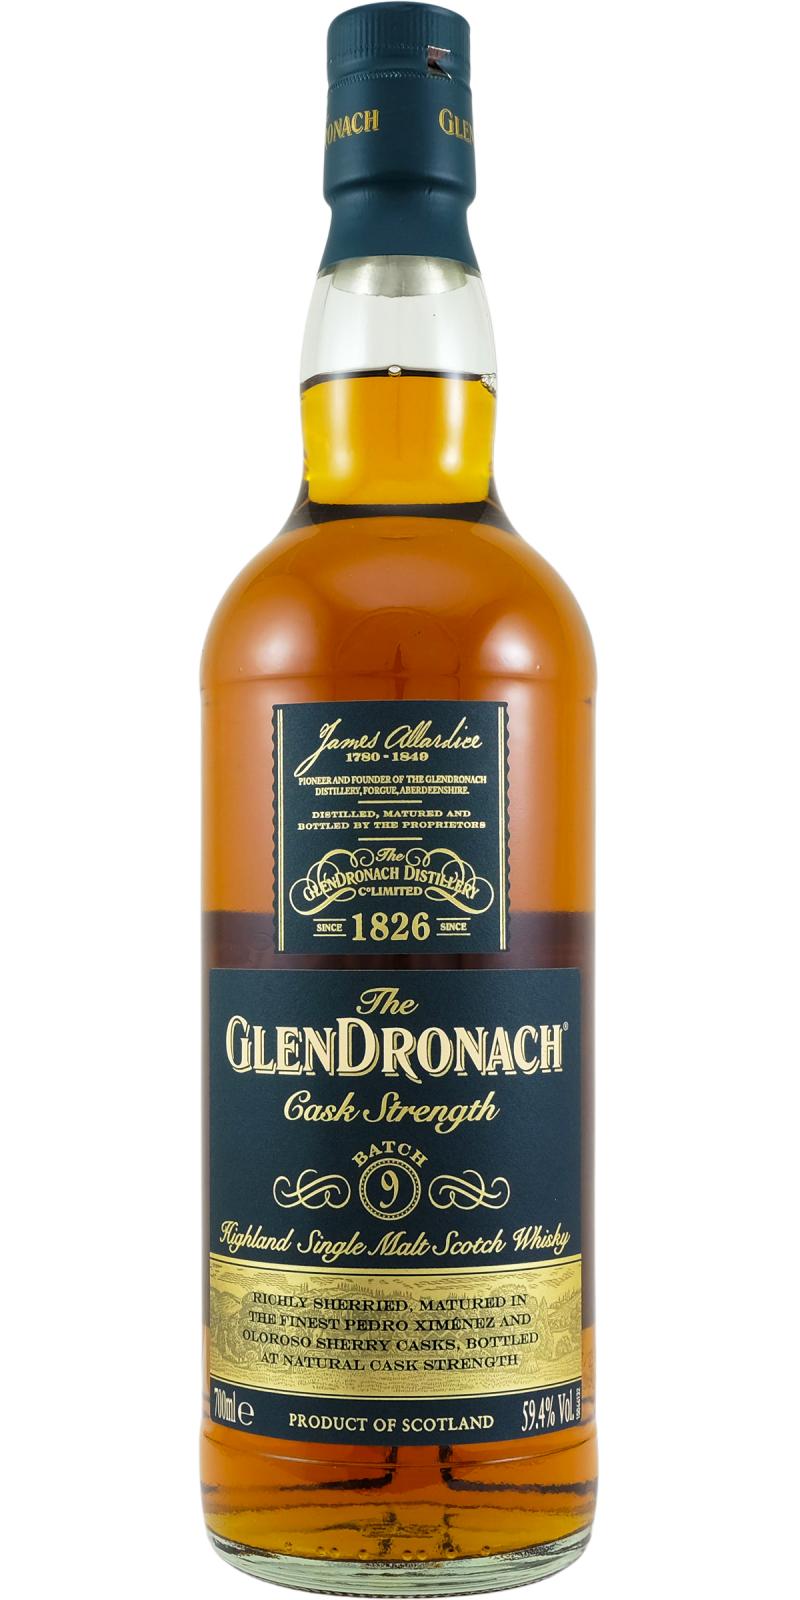 Glendronach Cask Strength - Ratings and reviews - Whiskybase